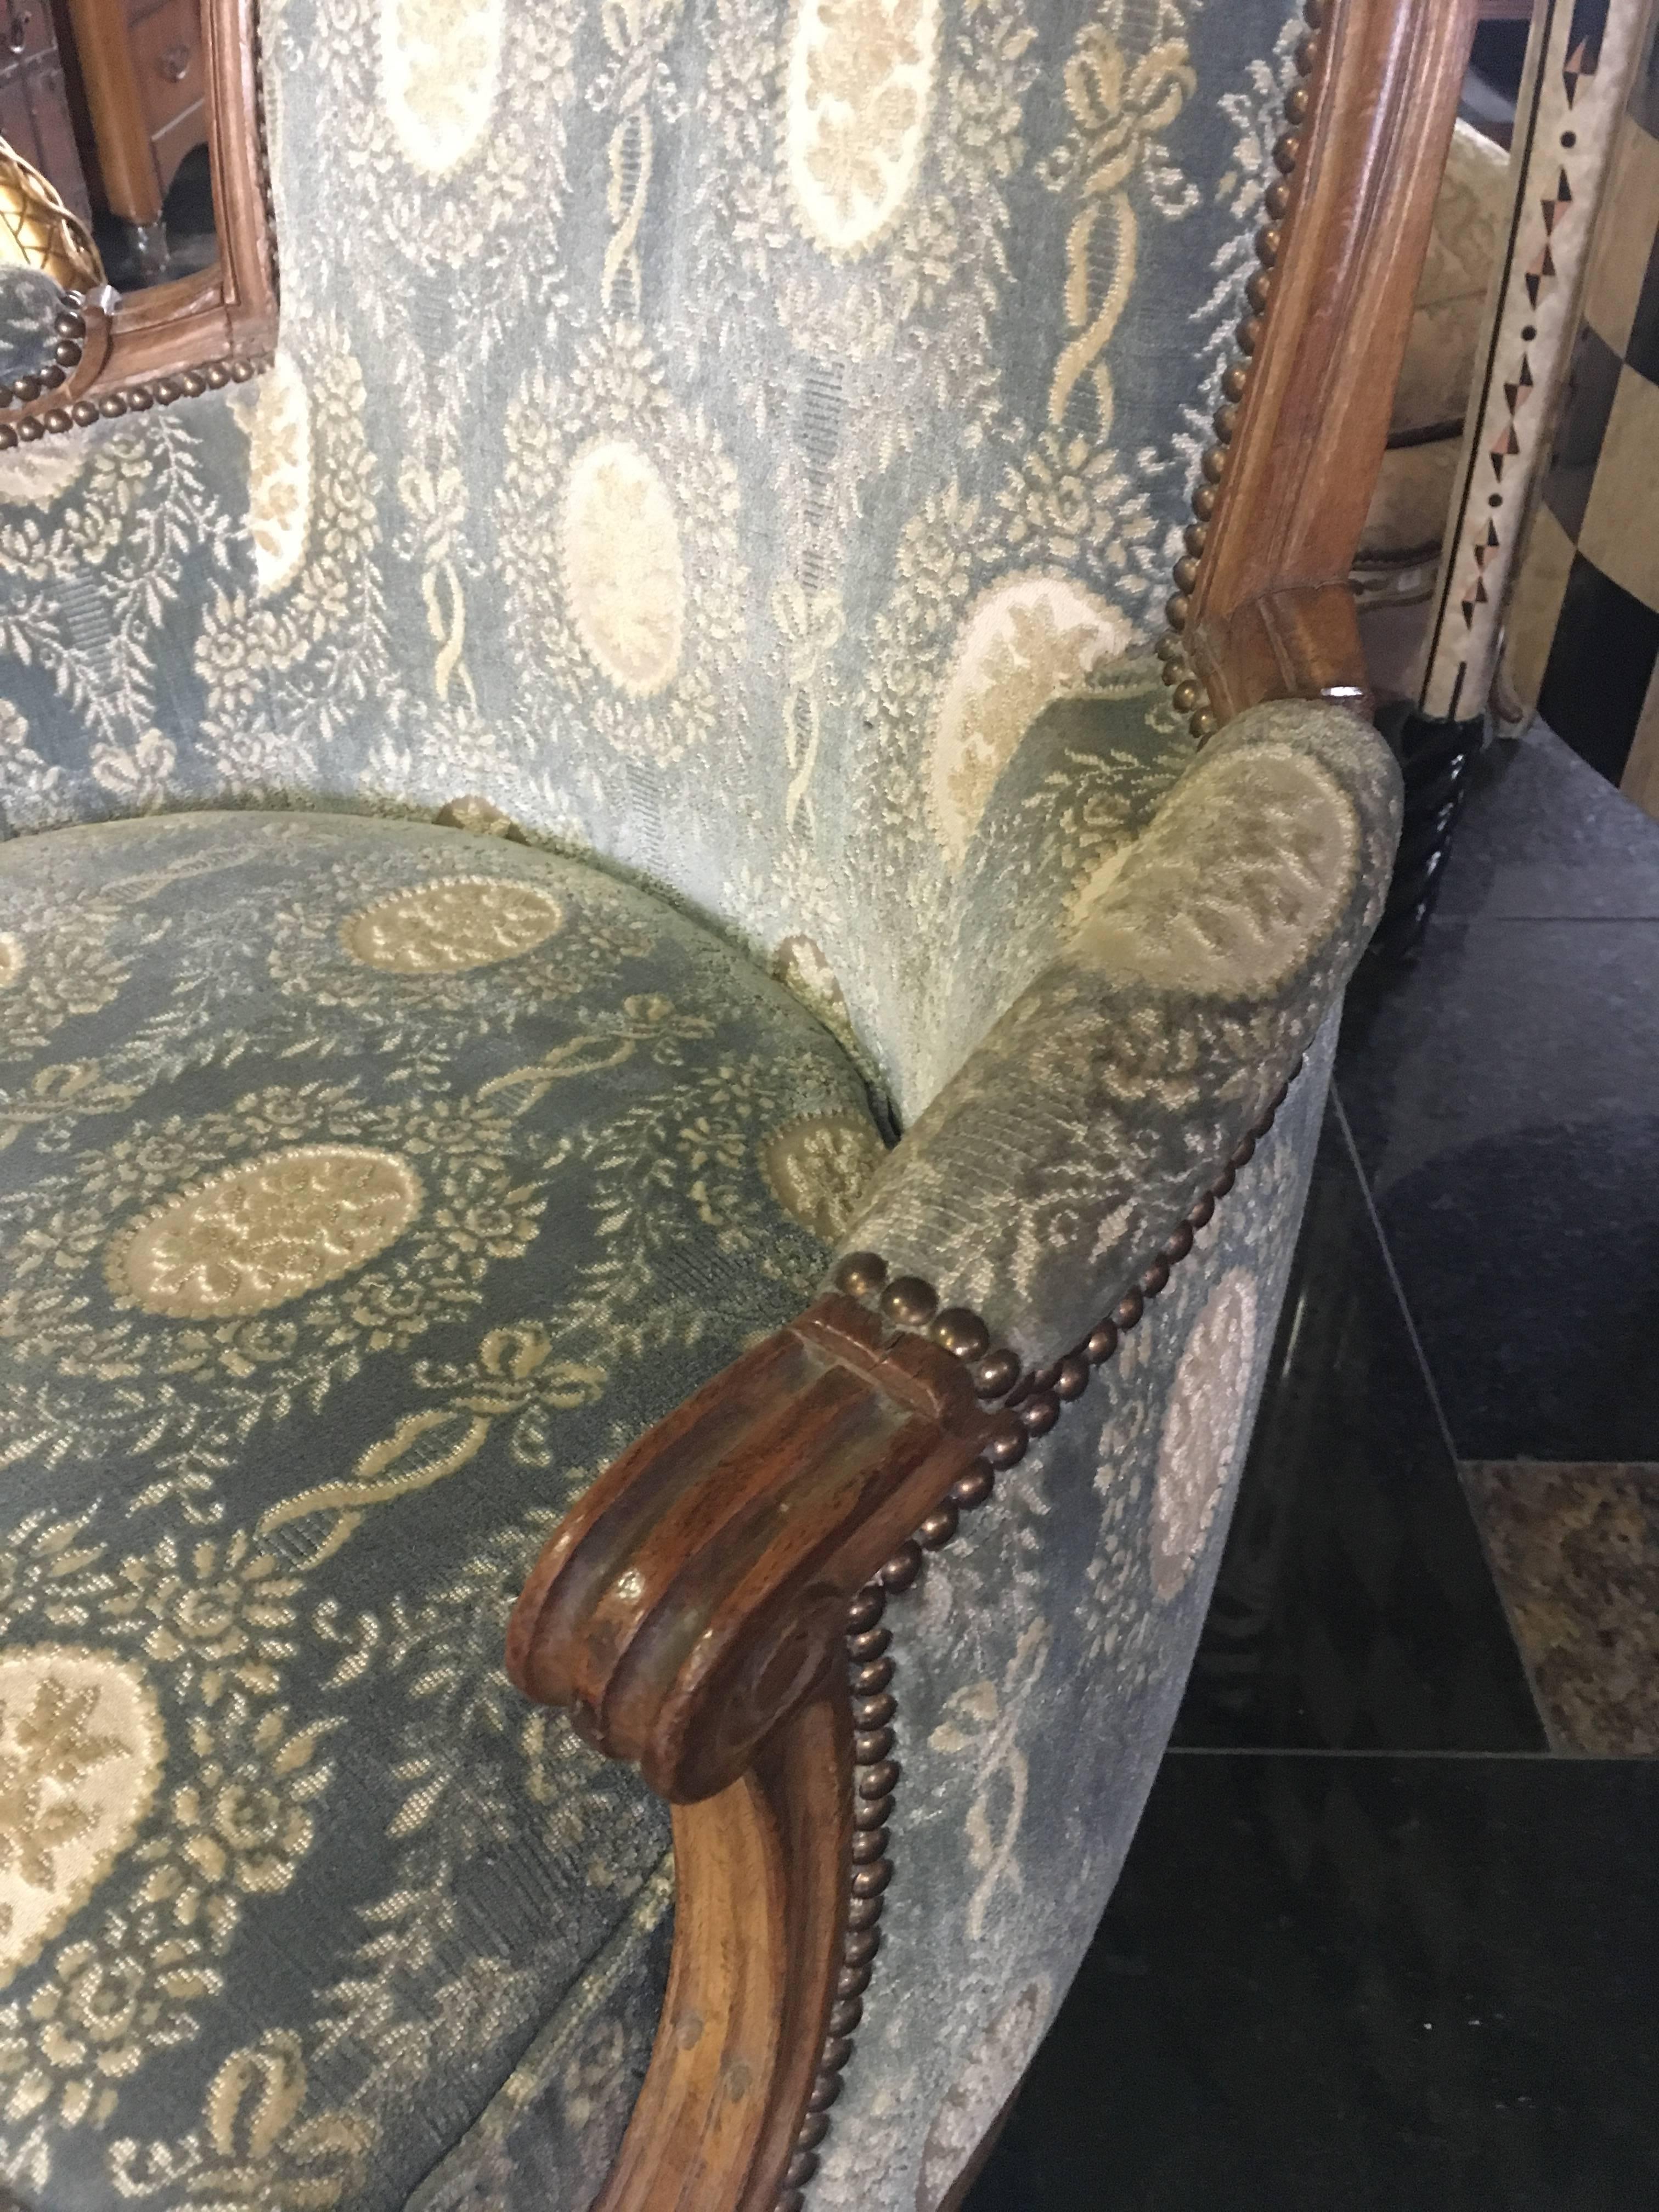 A masterfully carved 18th century Louis XVI bergère from France, resting on fluted tapered legs. The chair frame is embellished with fantastic detailed carvings, cabriolet back with rounded top. The velvet upholstery is in great condition and